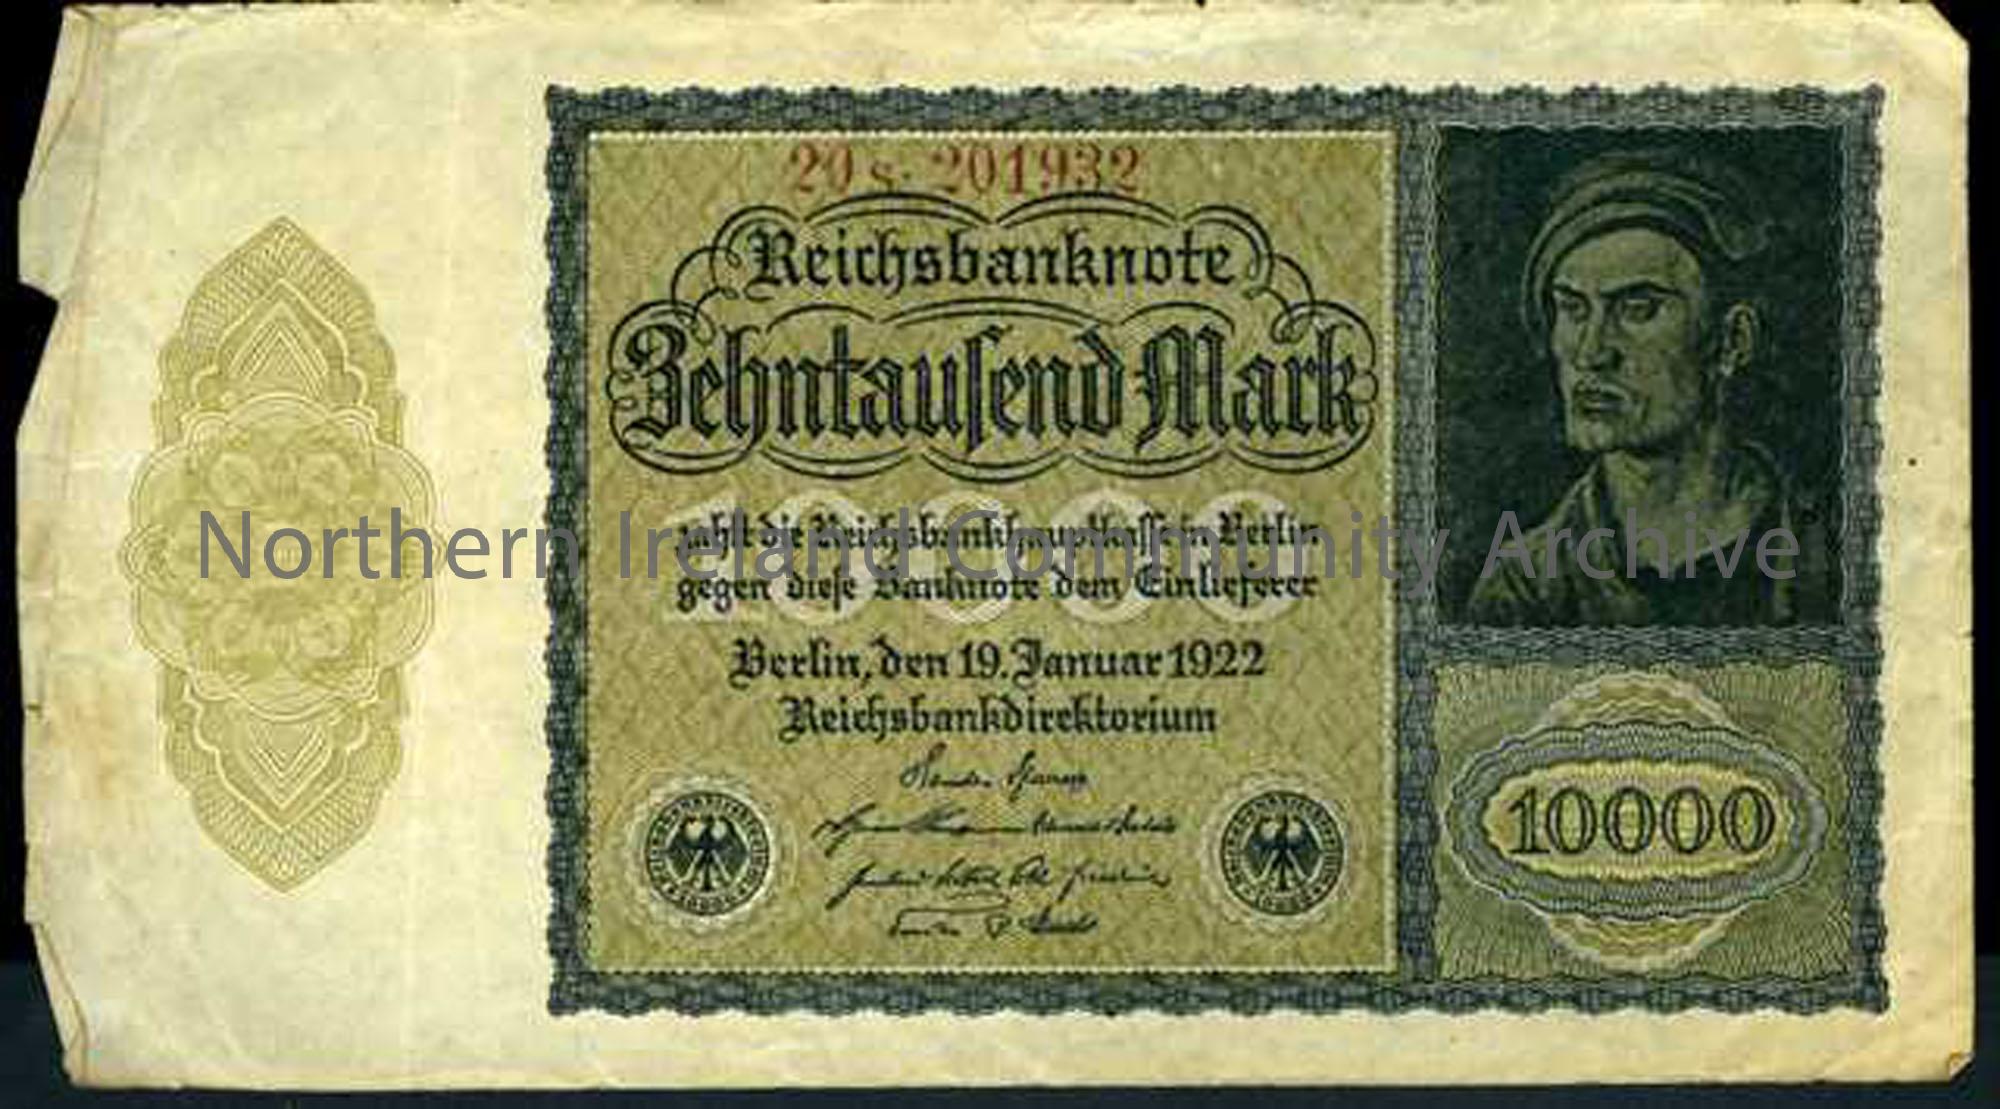 German bank note for 10,000 marks